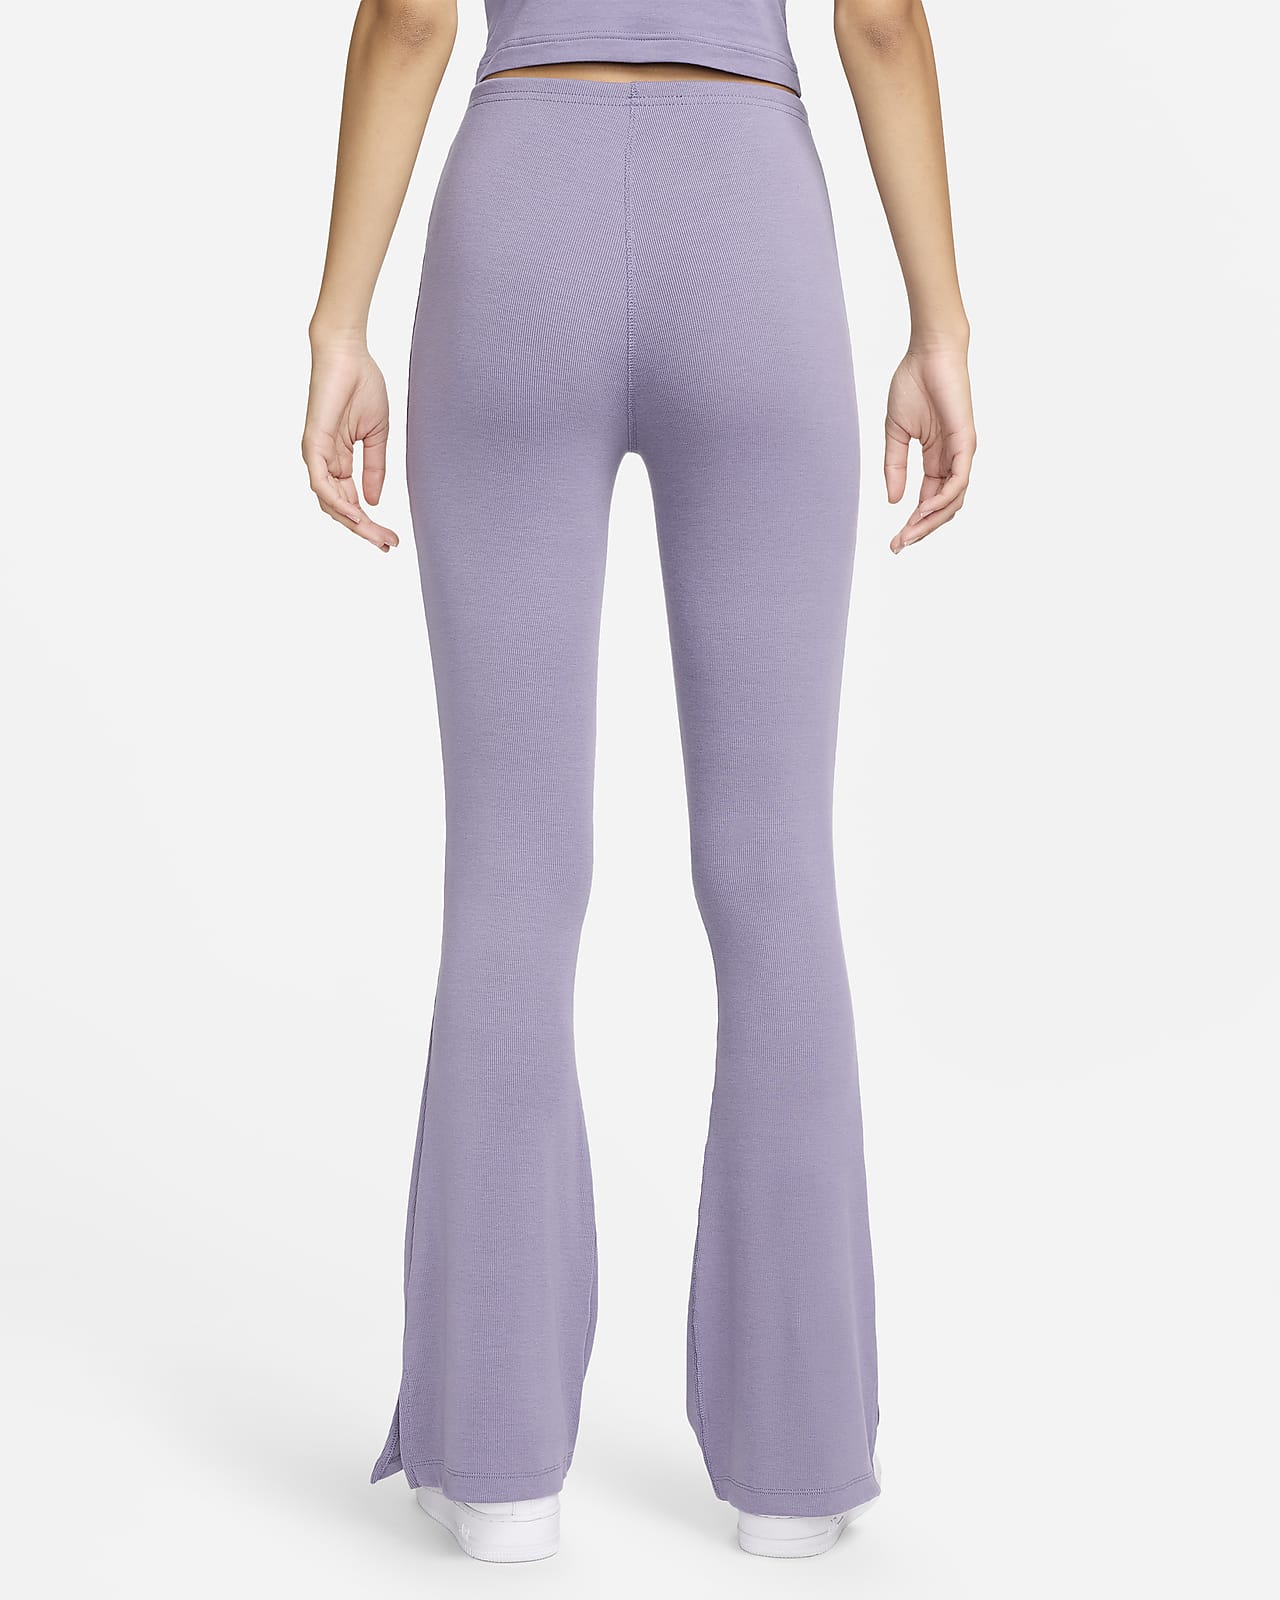 Cotton On Women's Ultra Soft Fold Over Flare Tight Pants | Vancouver Mall